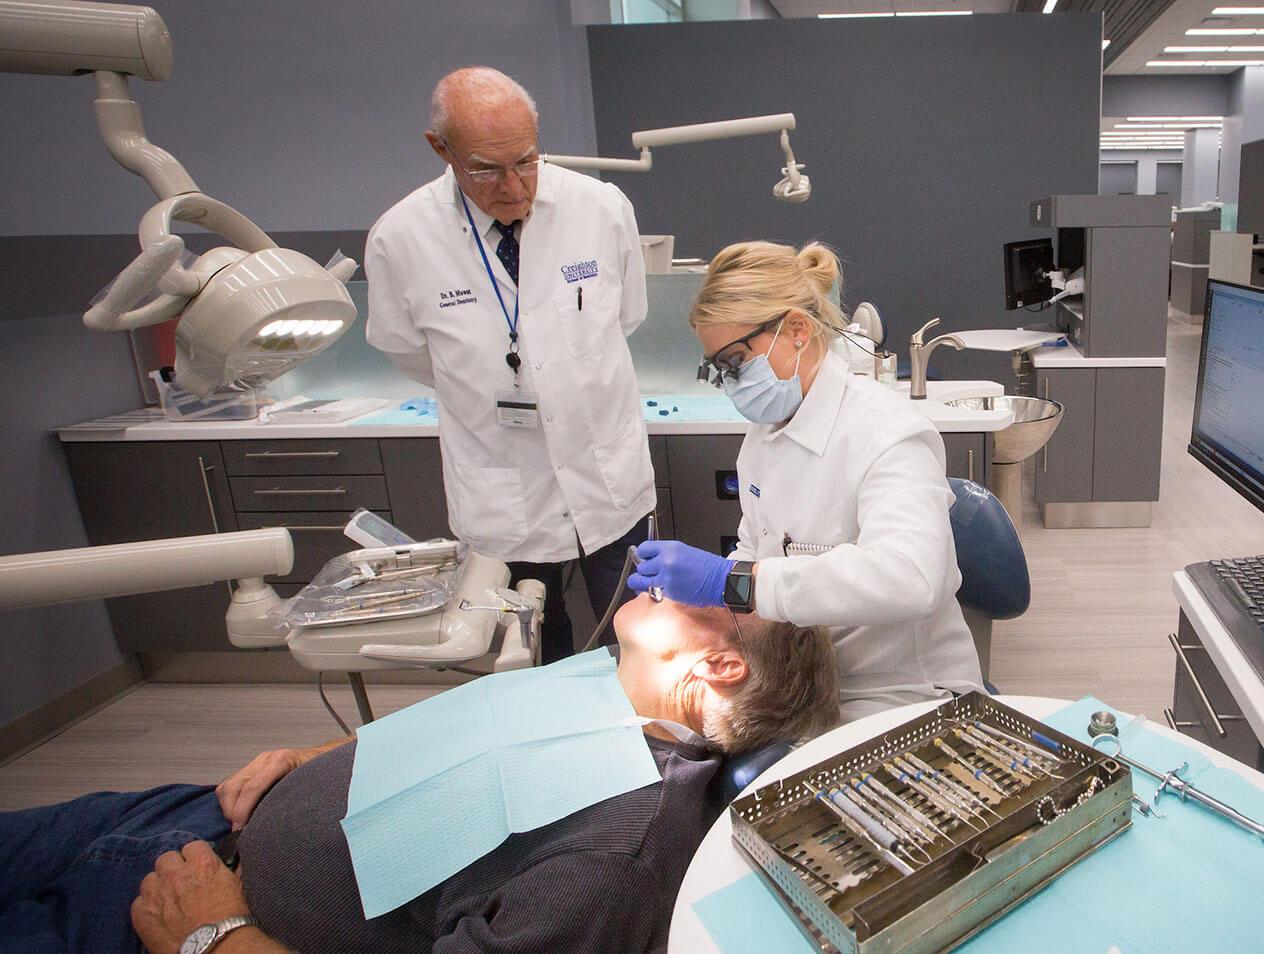 A dentist performs a procedure on a patient during a continuing education course while a professor looks on